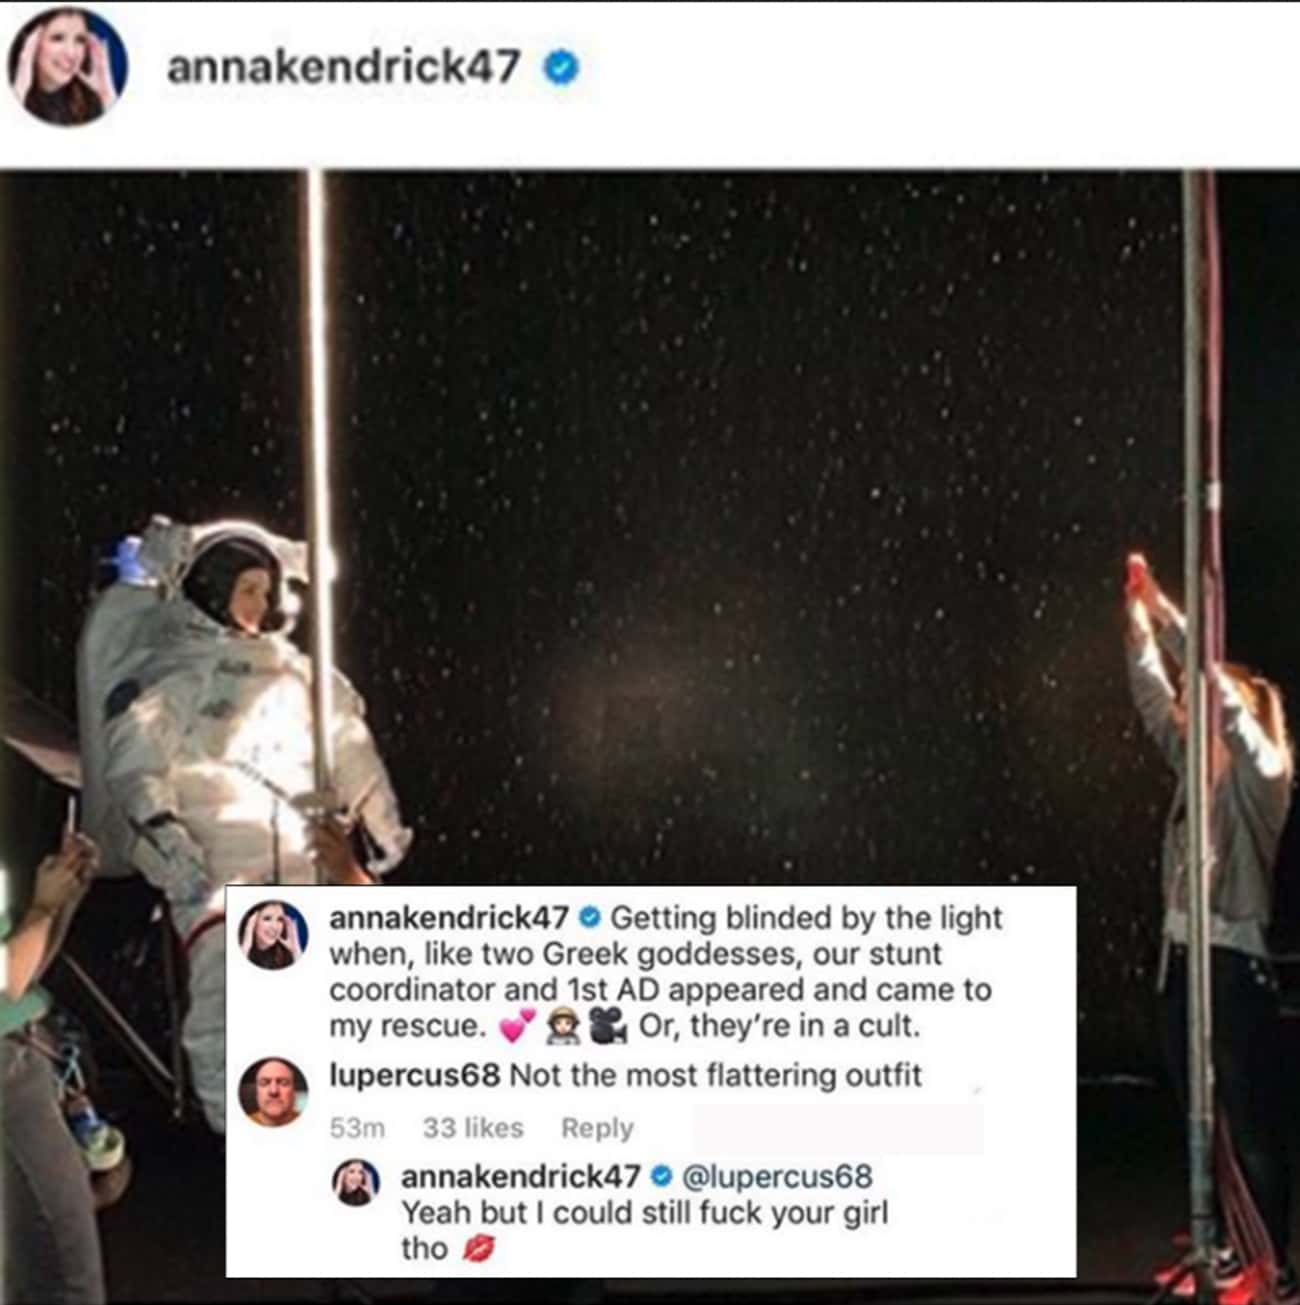 celebs savage replies - annakendrick47 annakendrick47 Getting blinded by the light when, two Greek goddesses, our stunt coordinator and 1st Ad appeared and came to my rescue. Or, they're in a cult. lupercus68 Not the most flattering outfit 53m 33 annakend